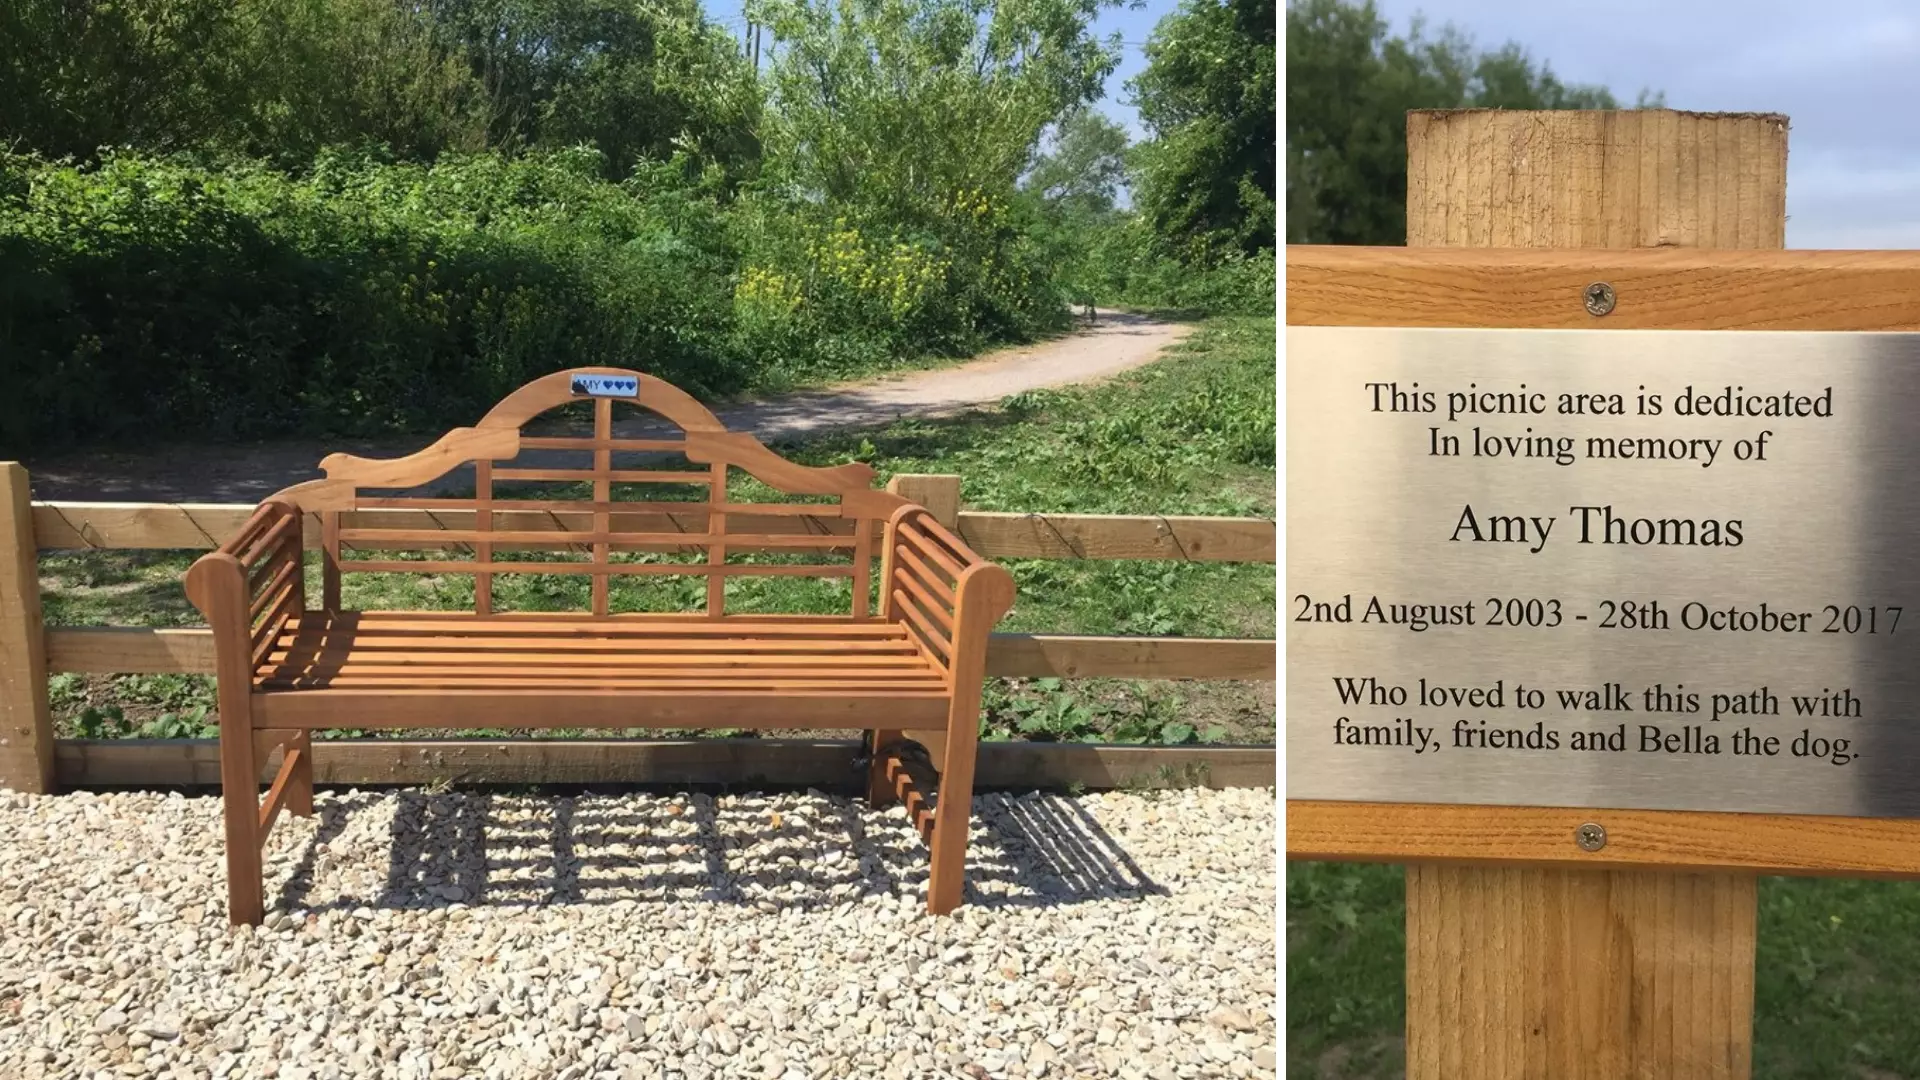 The 'picnic area' in Glastonbury, Somerset, dedicated in Amy's name.